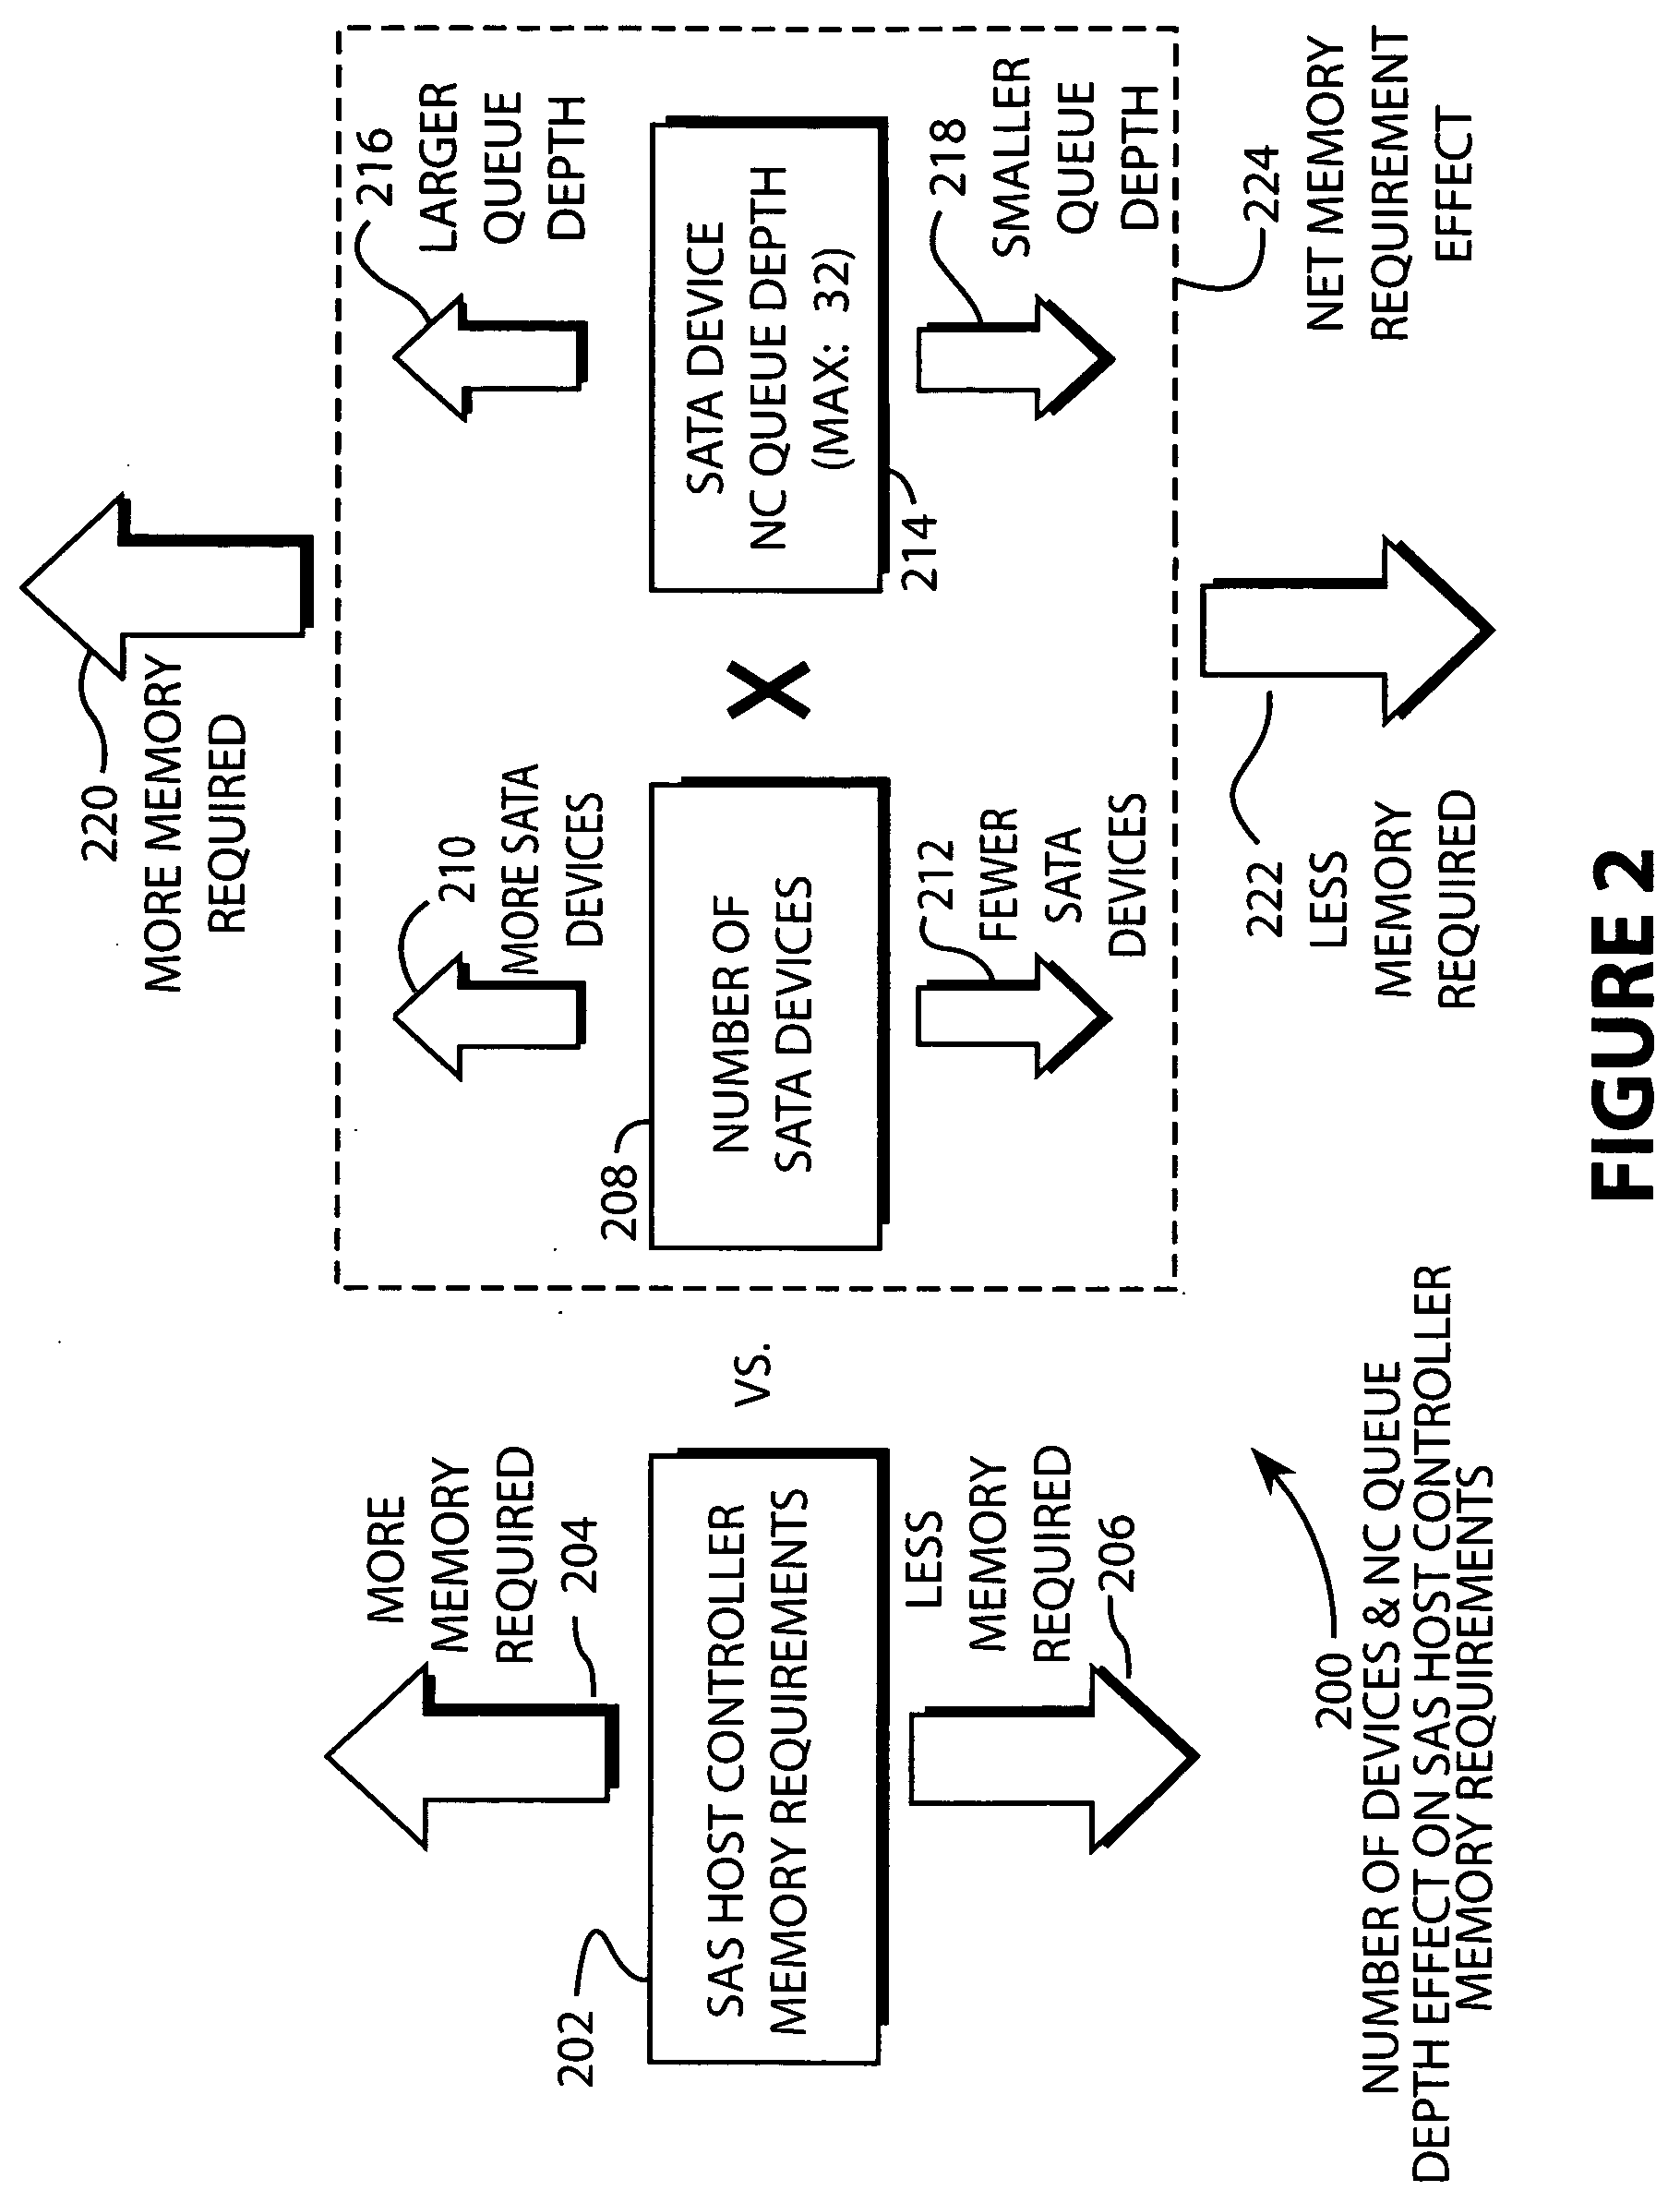 Circuit and method to provide configuration of serial ATA queue depth versus number of devices